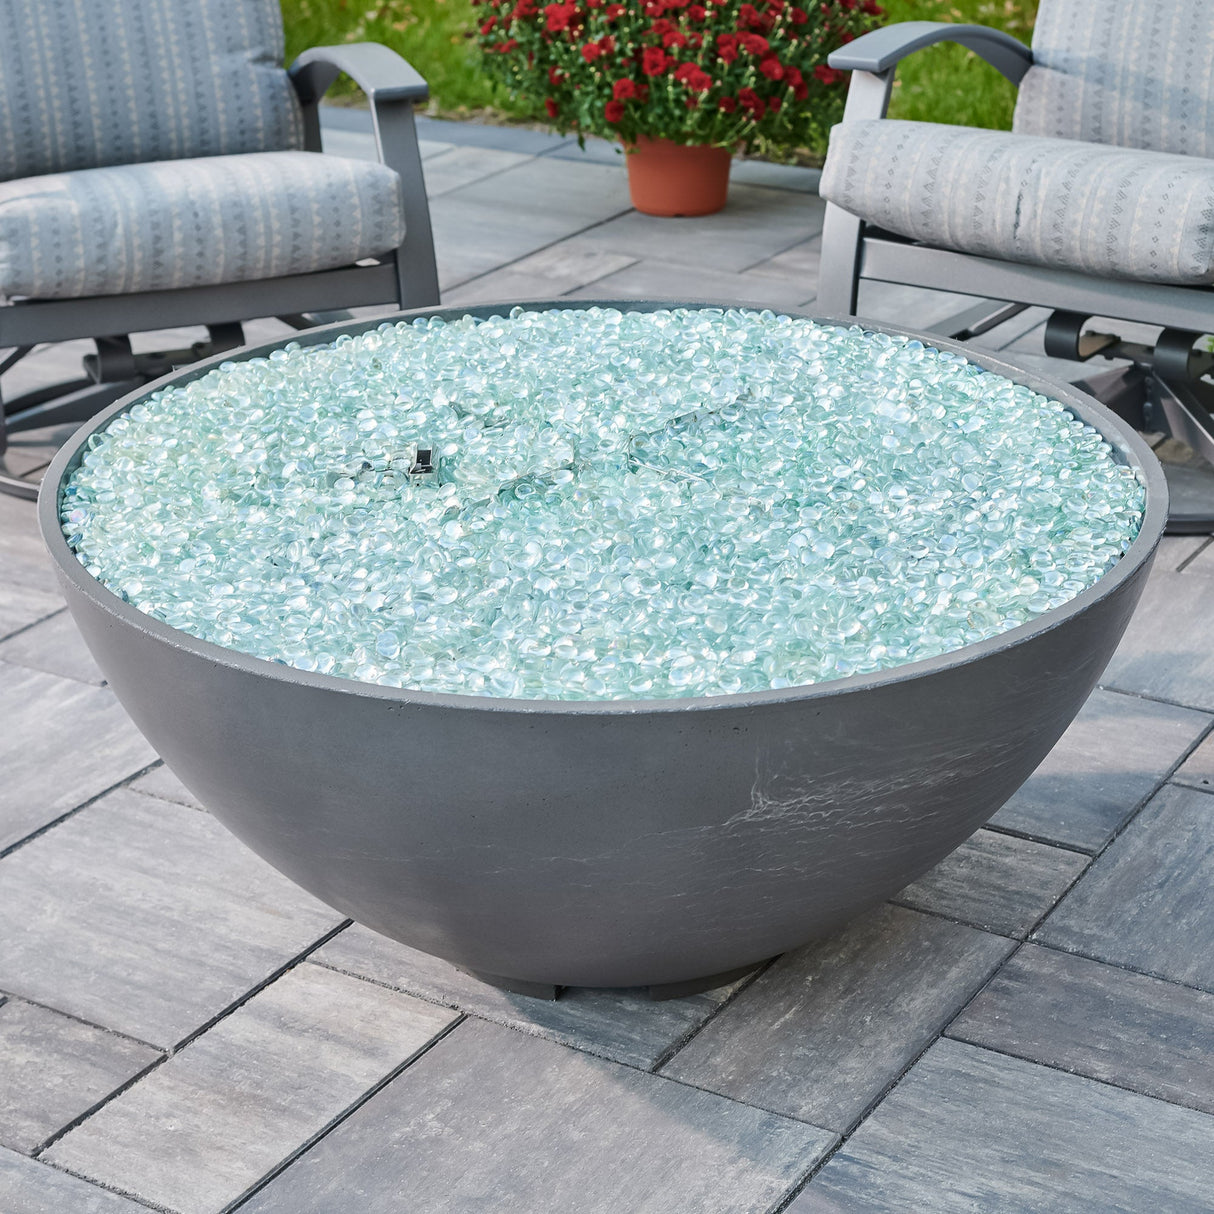 A view of fire gems on the burner of a Midnight Mist Cove Edge Round Gas Fire Pit Bowl 42"